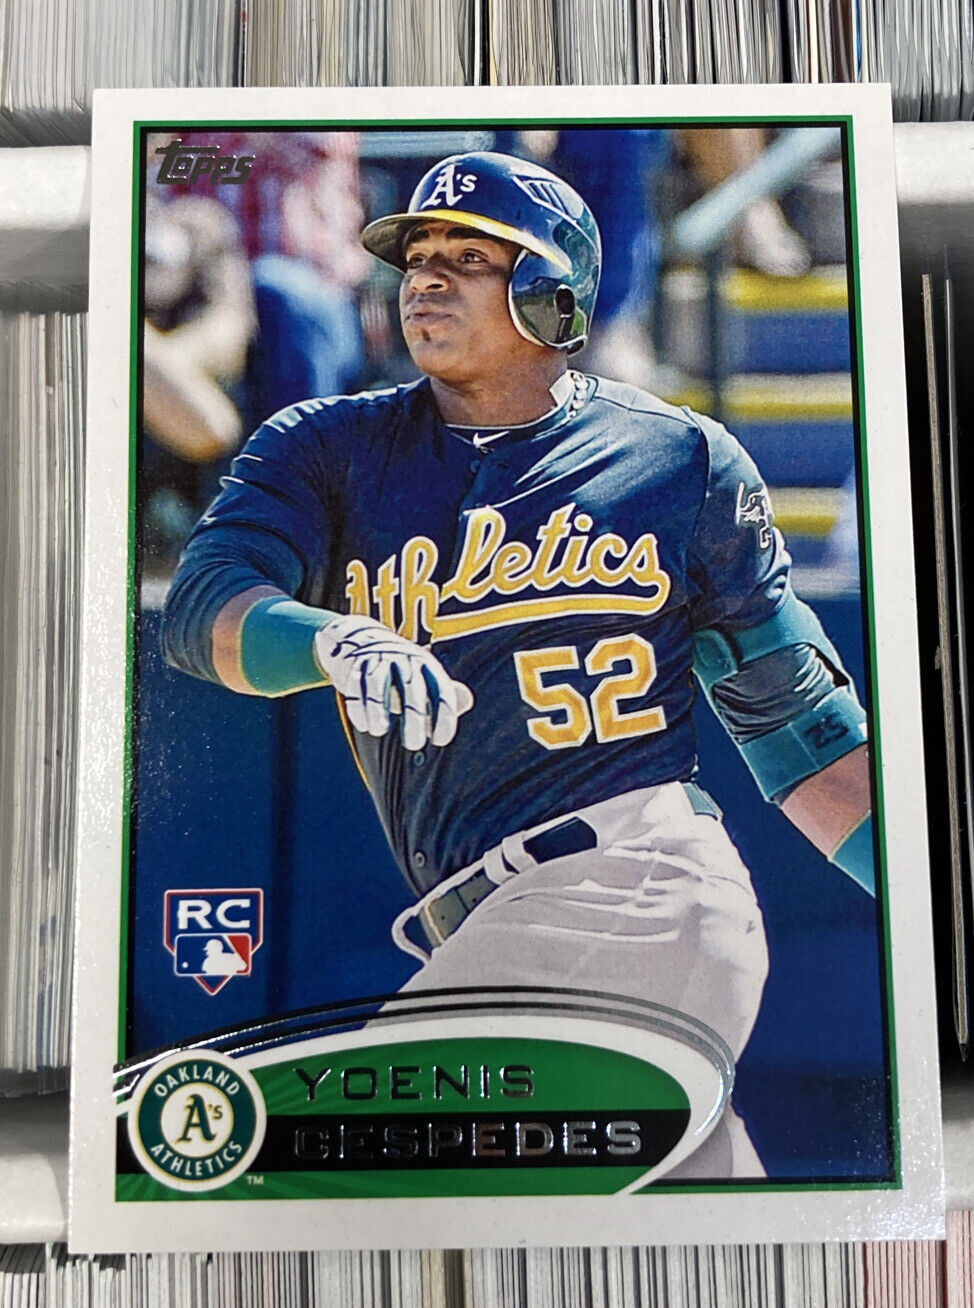 2012 Topps YOENIS CESPEDES RC Rookie Card #396 Oakland Athletics New York Mets